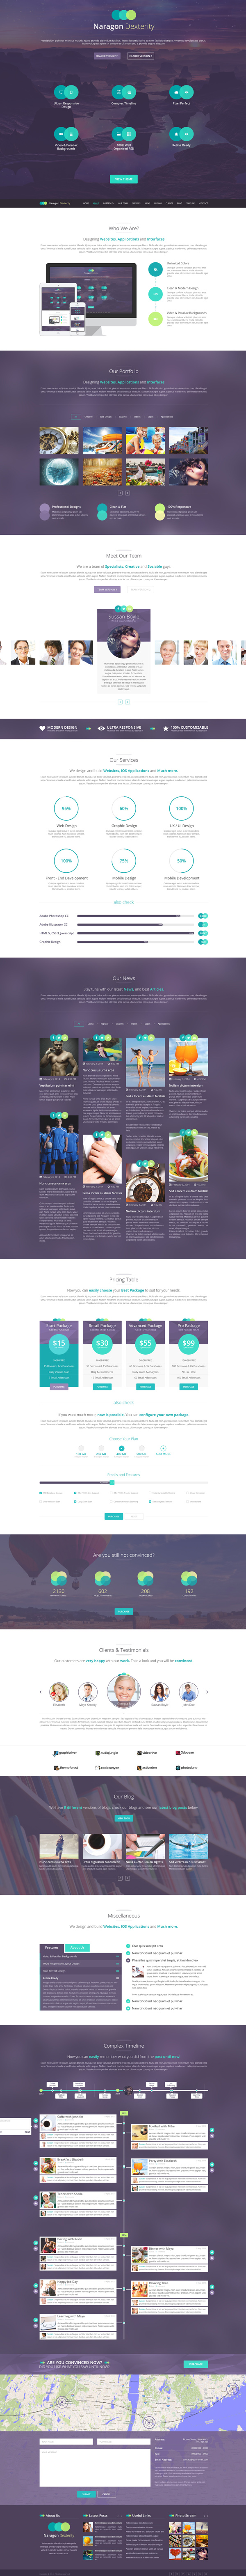 Naragon Dexterity - One page PSD HTML5 Template